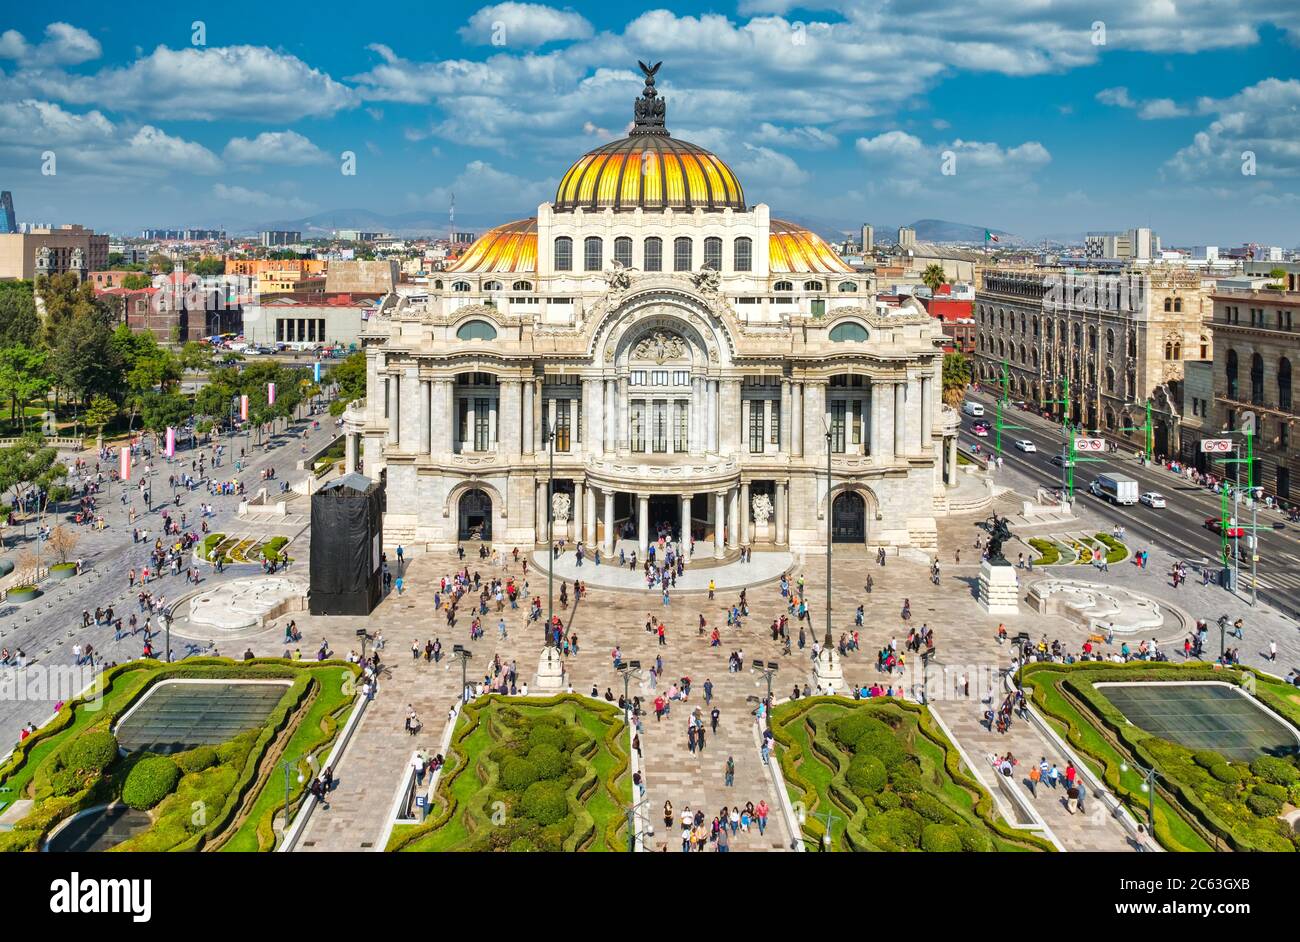 Palacio de Bellas Artes or Palace of Fine Arts, a famous theater, museum and music venue in Mexico City Stock Photo